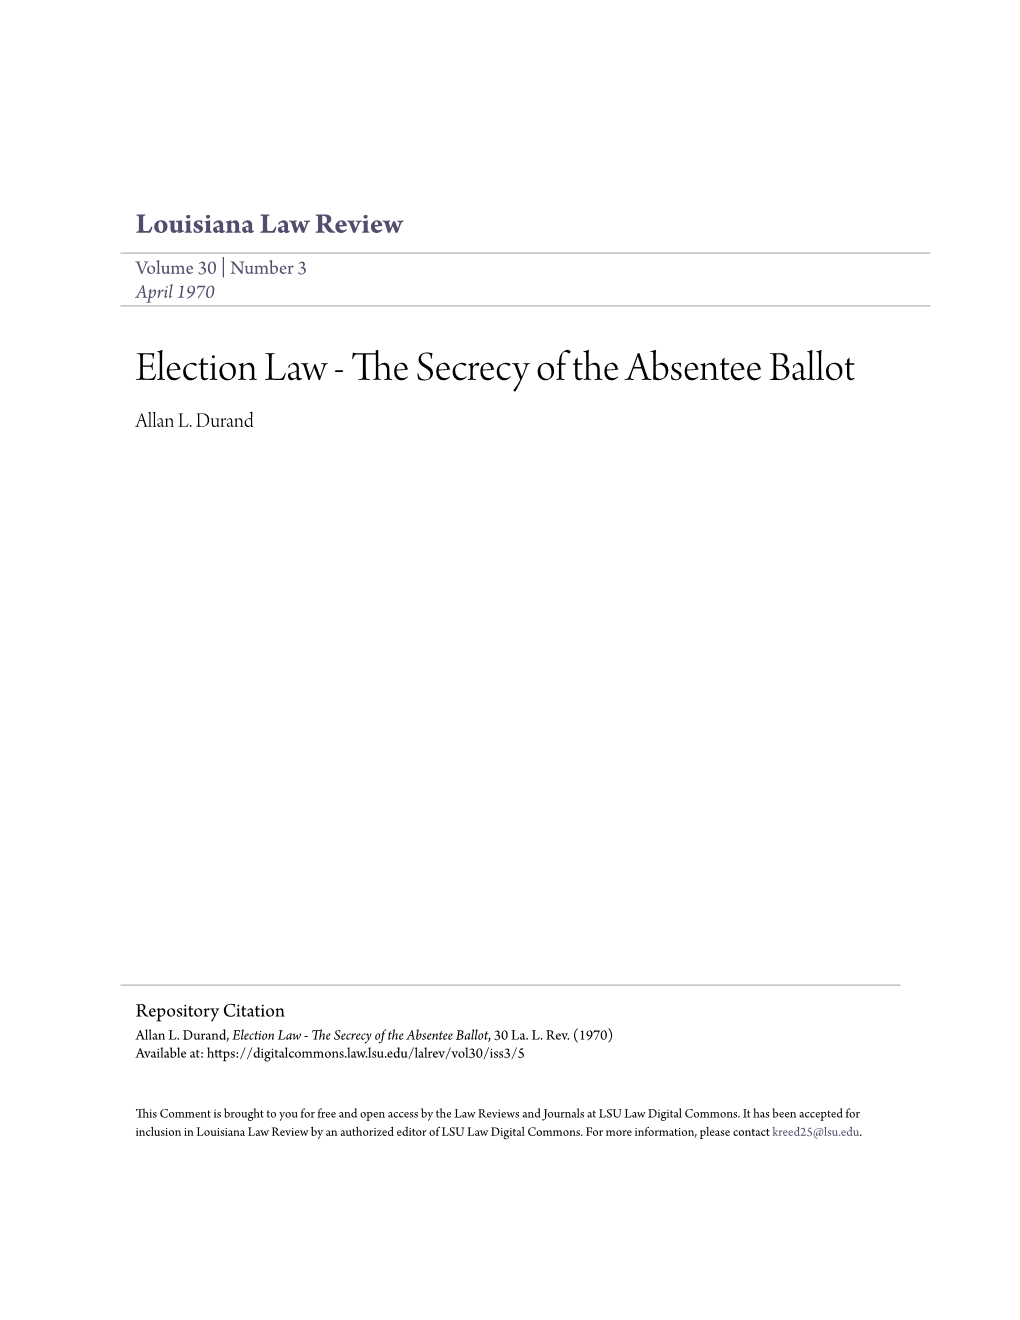 Election Law - the Ecrs Ecy of the Absentee Ballot Allan L